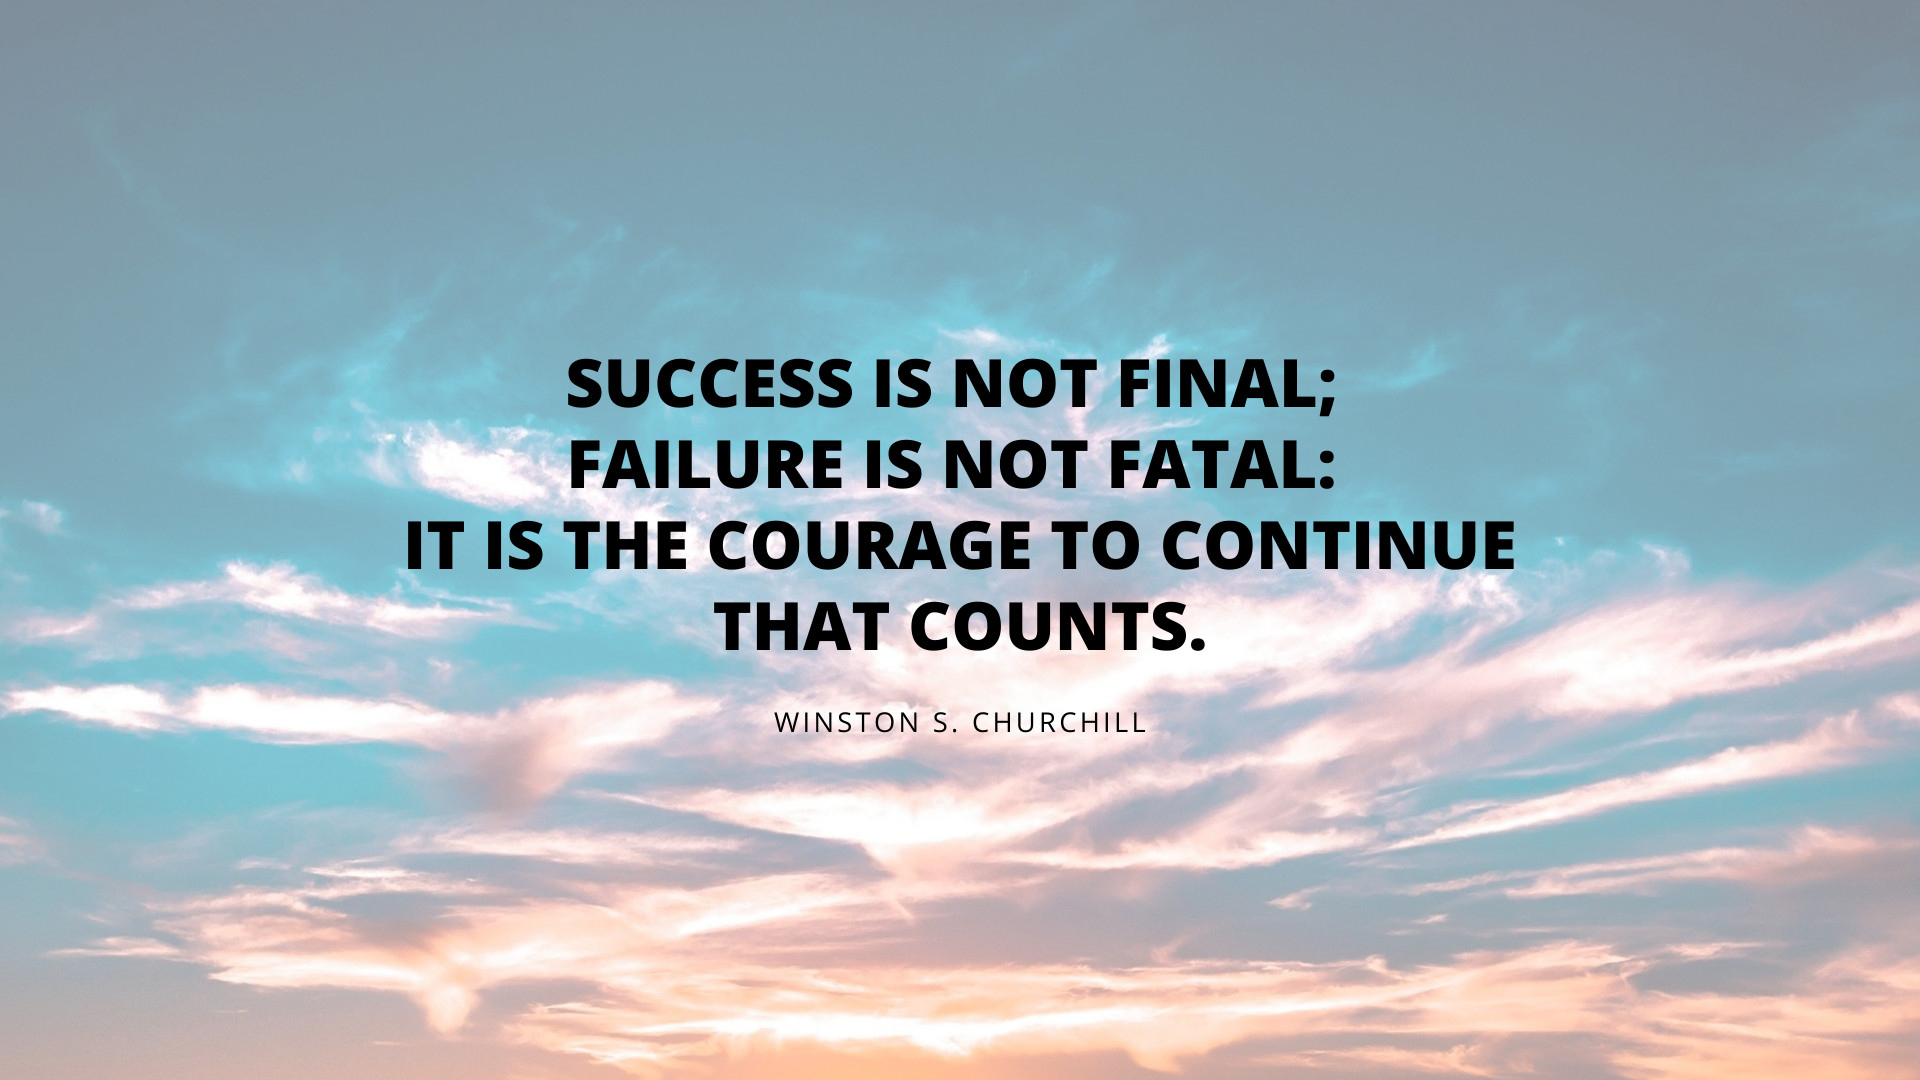 Success Is Not Final Failure Is Not Final It Is The Courage To Continue HD Motivational